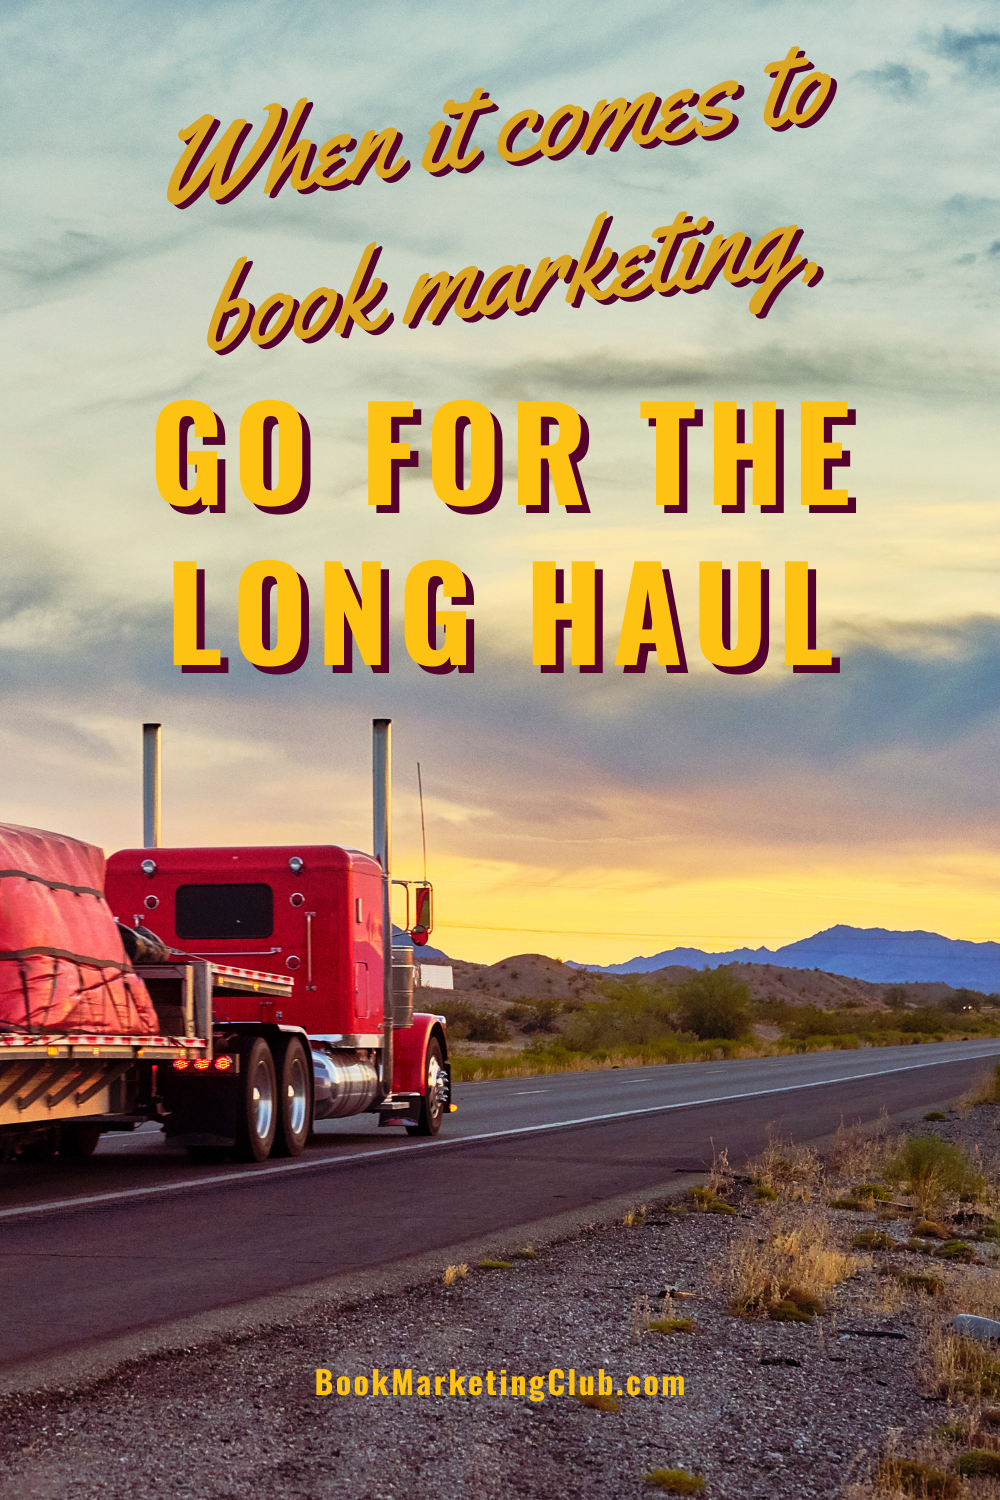 When it comes to book marketing, go for the long haul